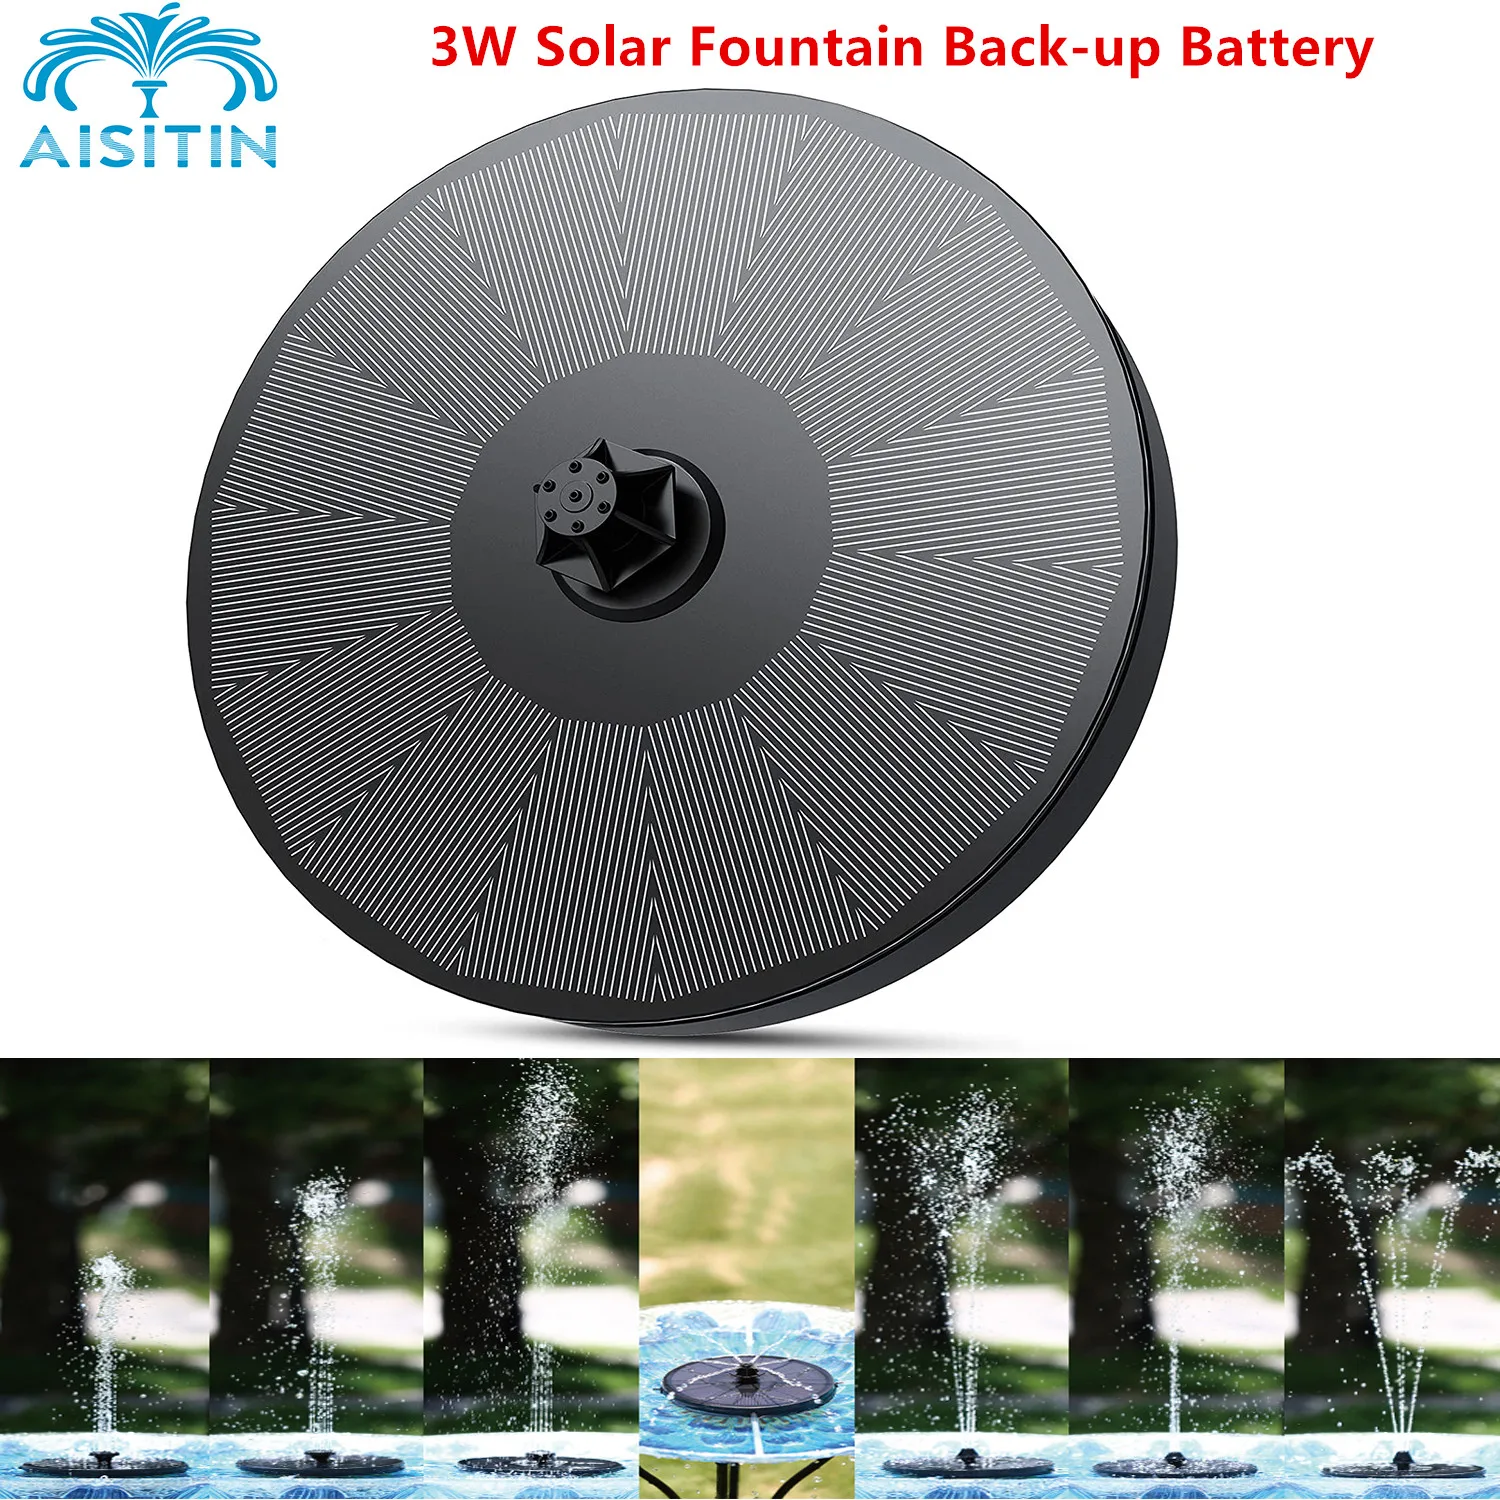 Solar Powered Water Fountain Pump with 4 Fixed Sticks AISITIN 3W Solar Fountain Pump with Back-up Battery Solar Water Pump Floating Fountain Equipped 7 Nozzles for Bird Bath and Outdoor Pond Garden 